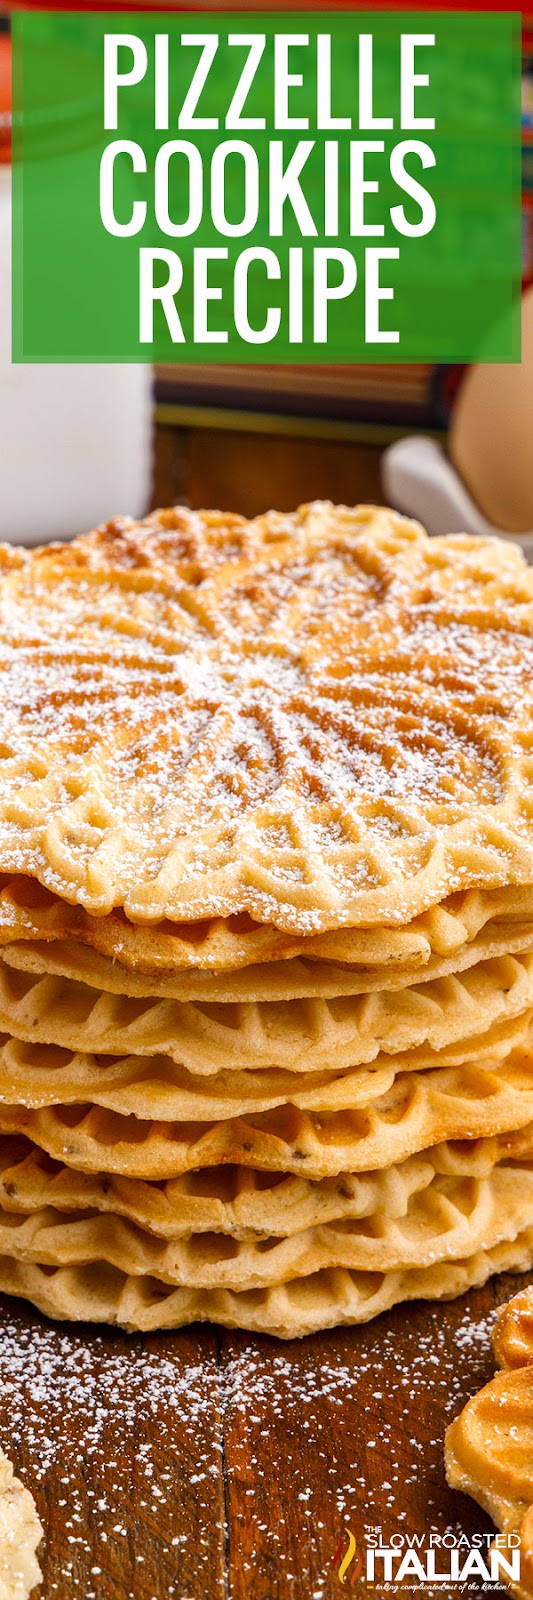 titled: pizzelle cookies recipe